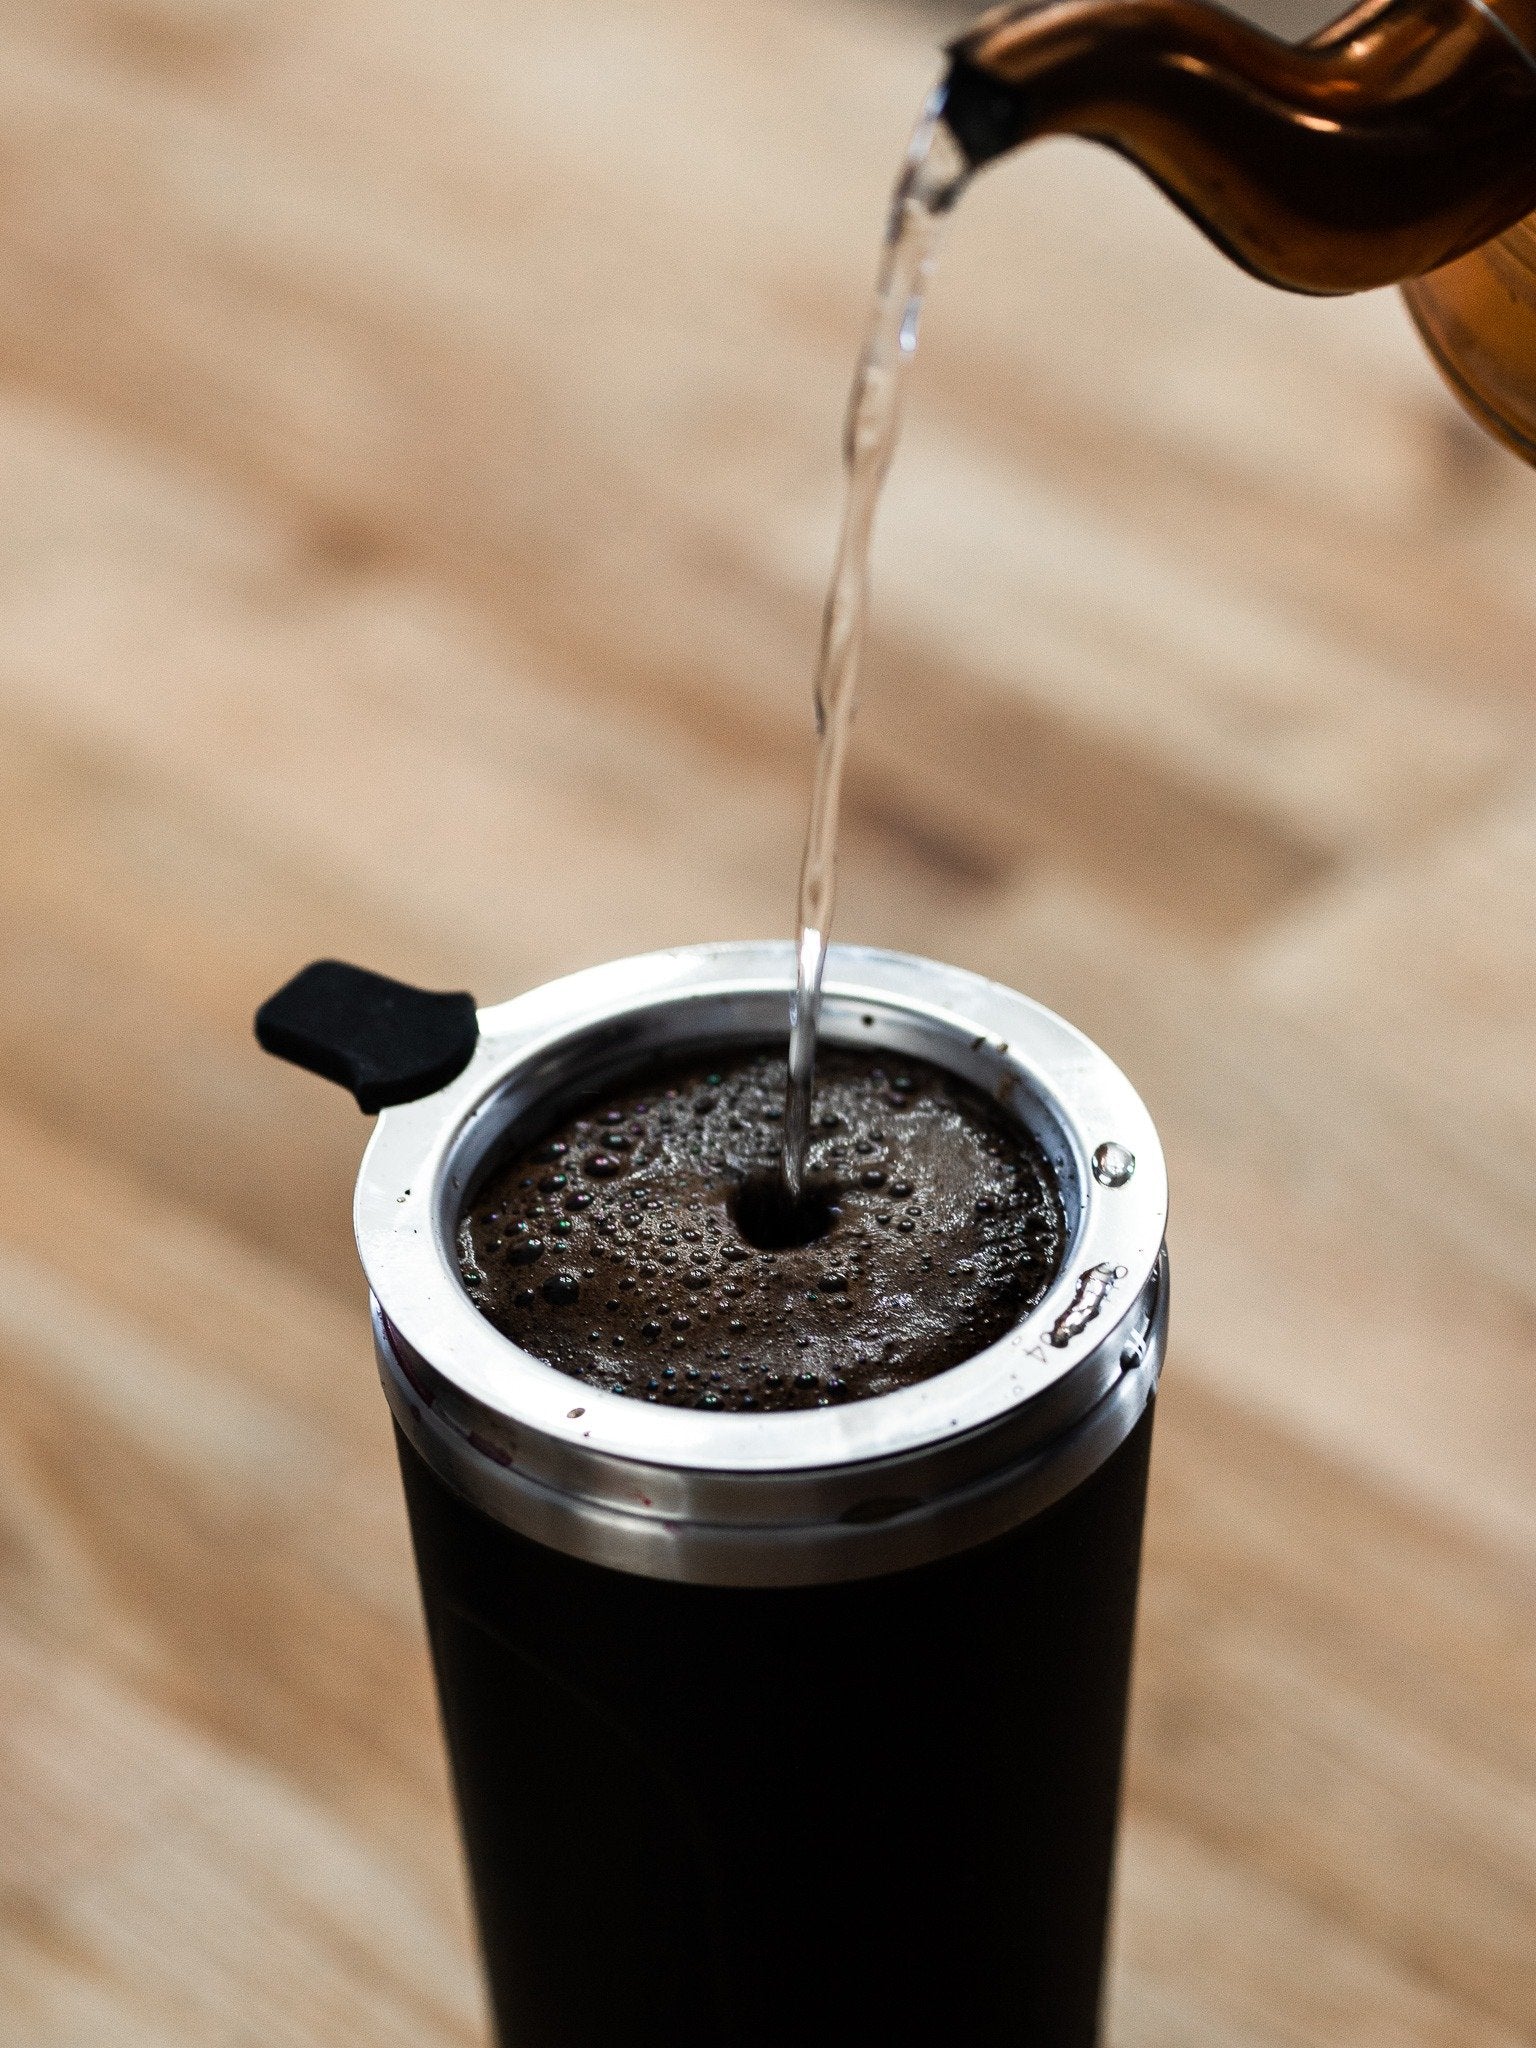 Make coffee with the portable drink set